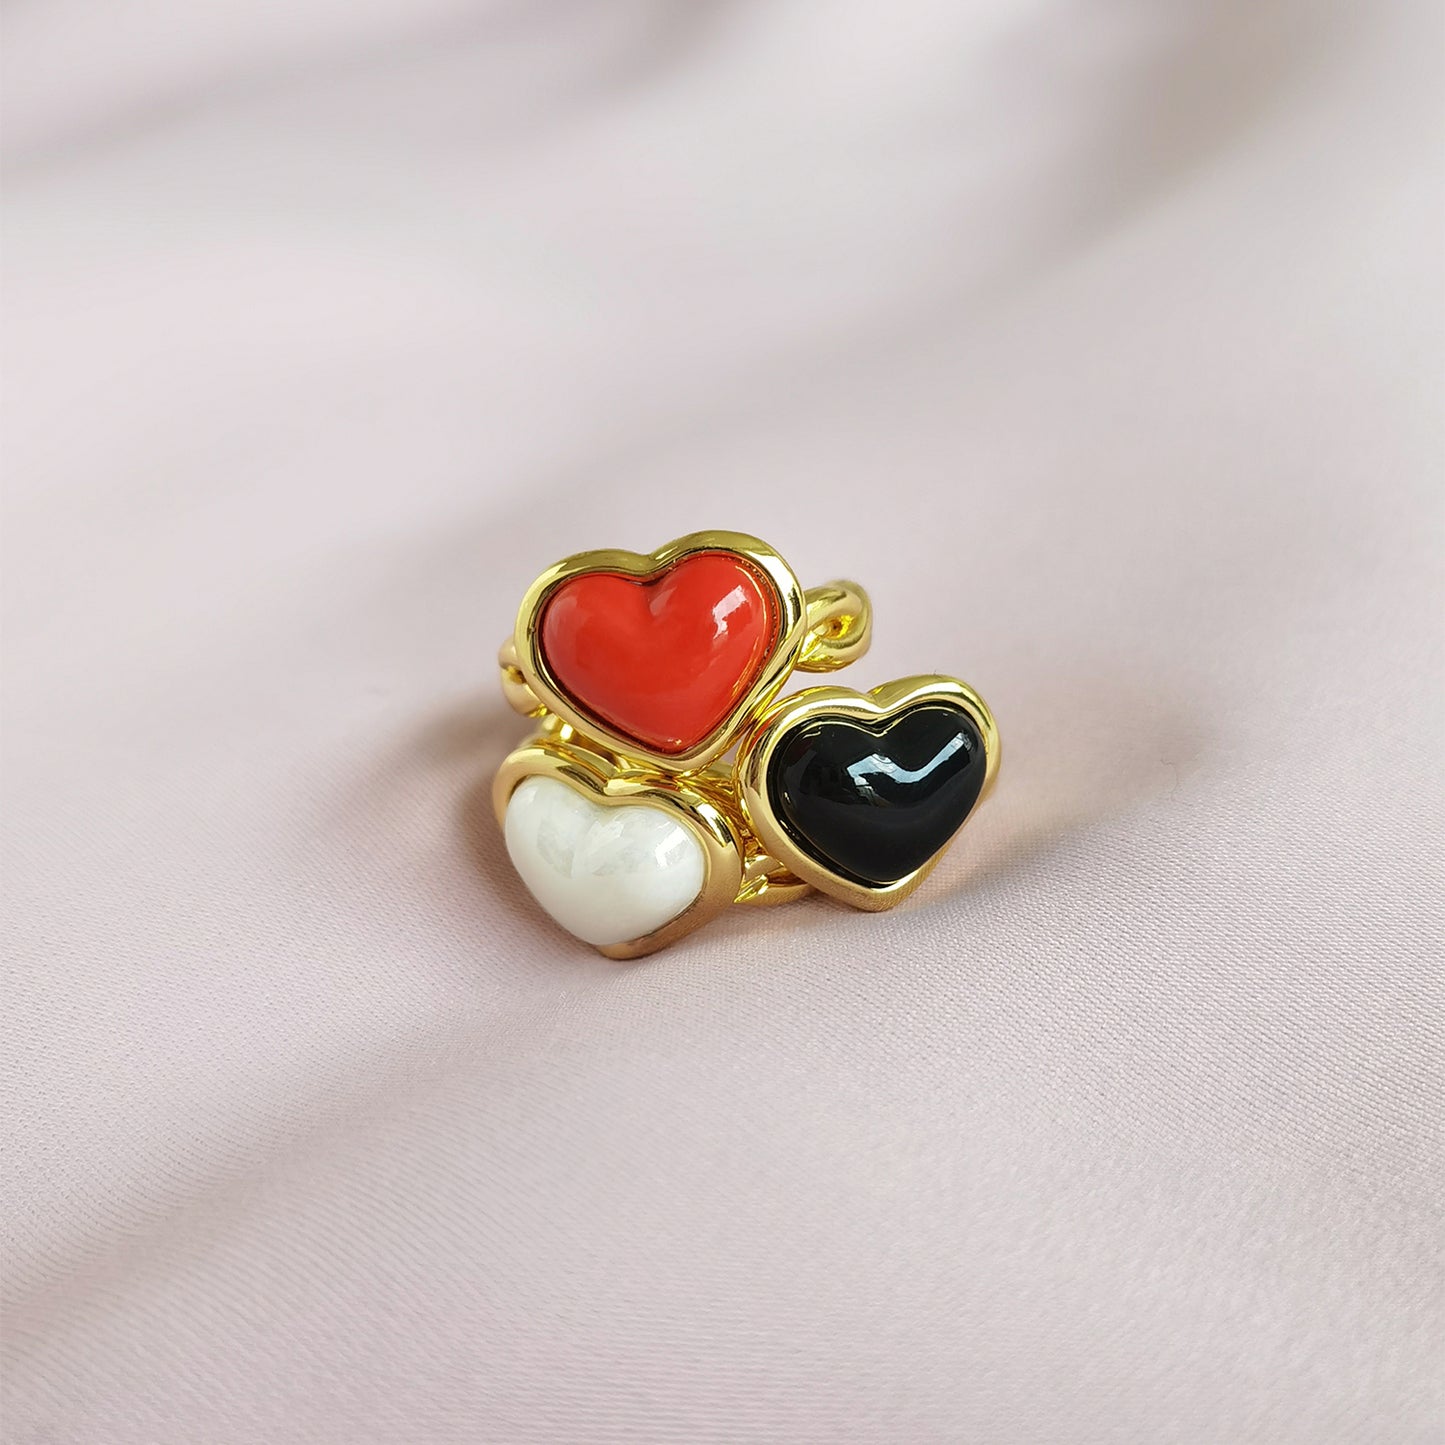 Porcelain Red Heart Braided Ring